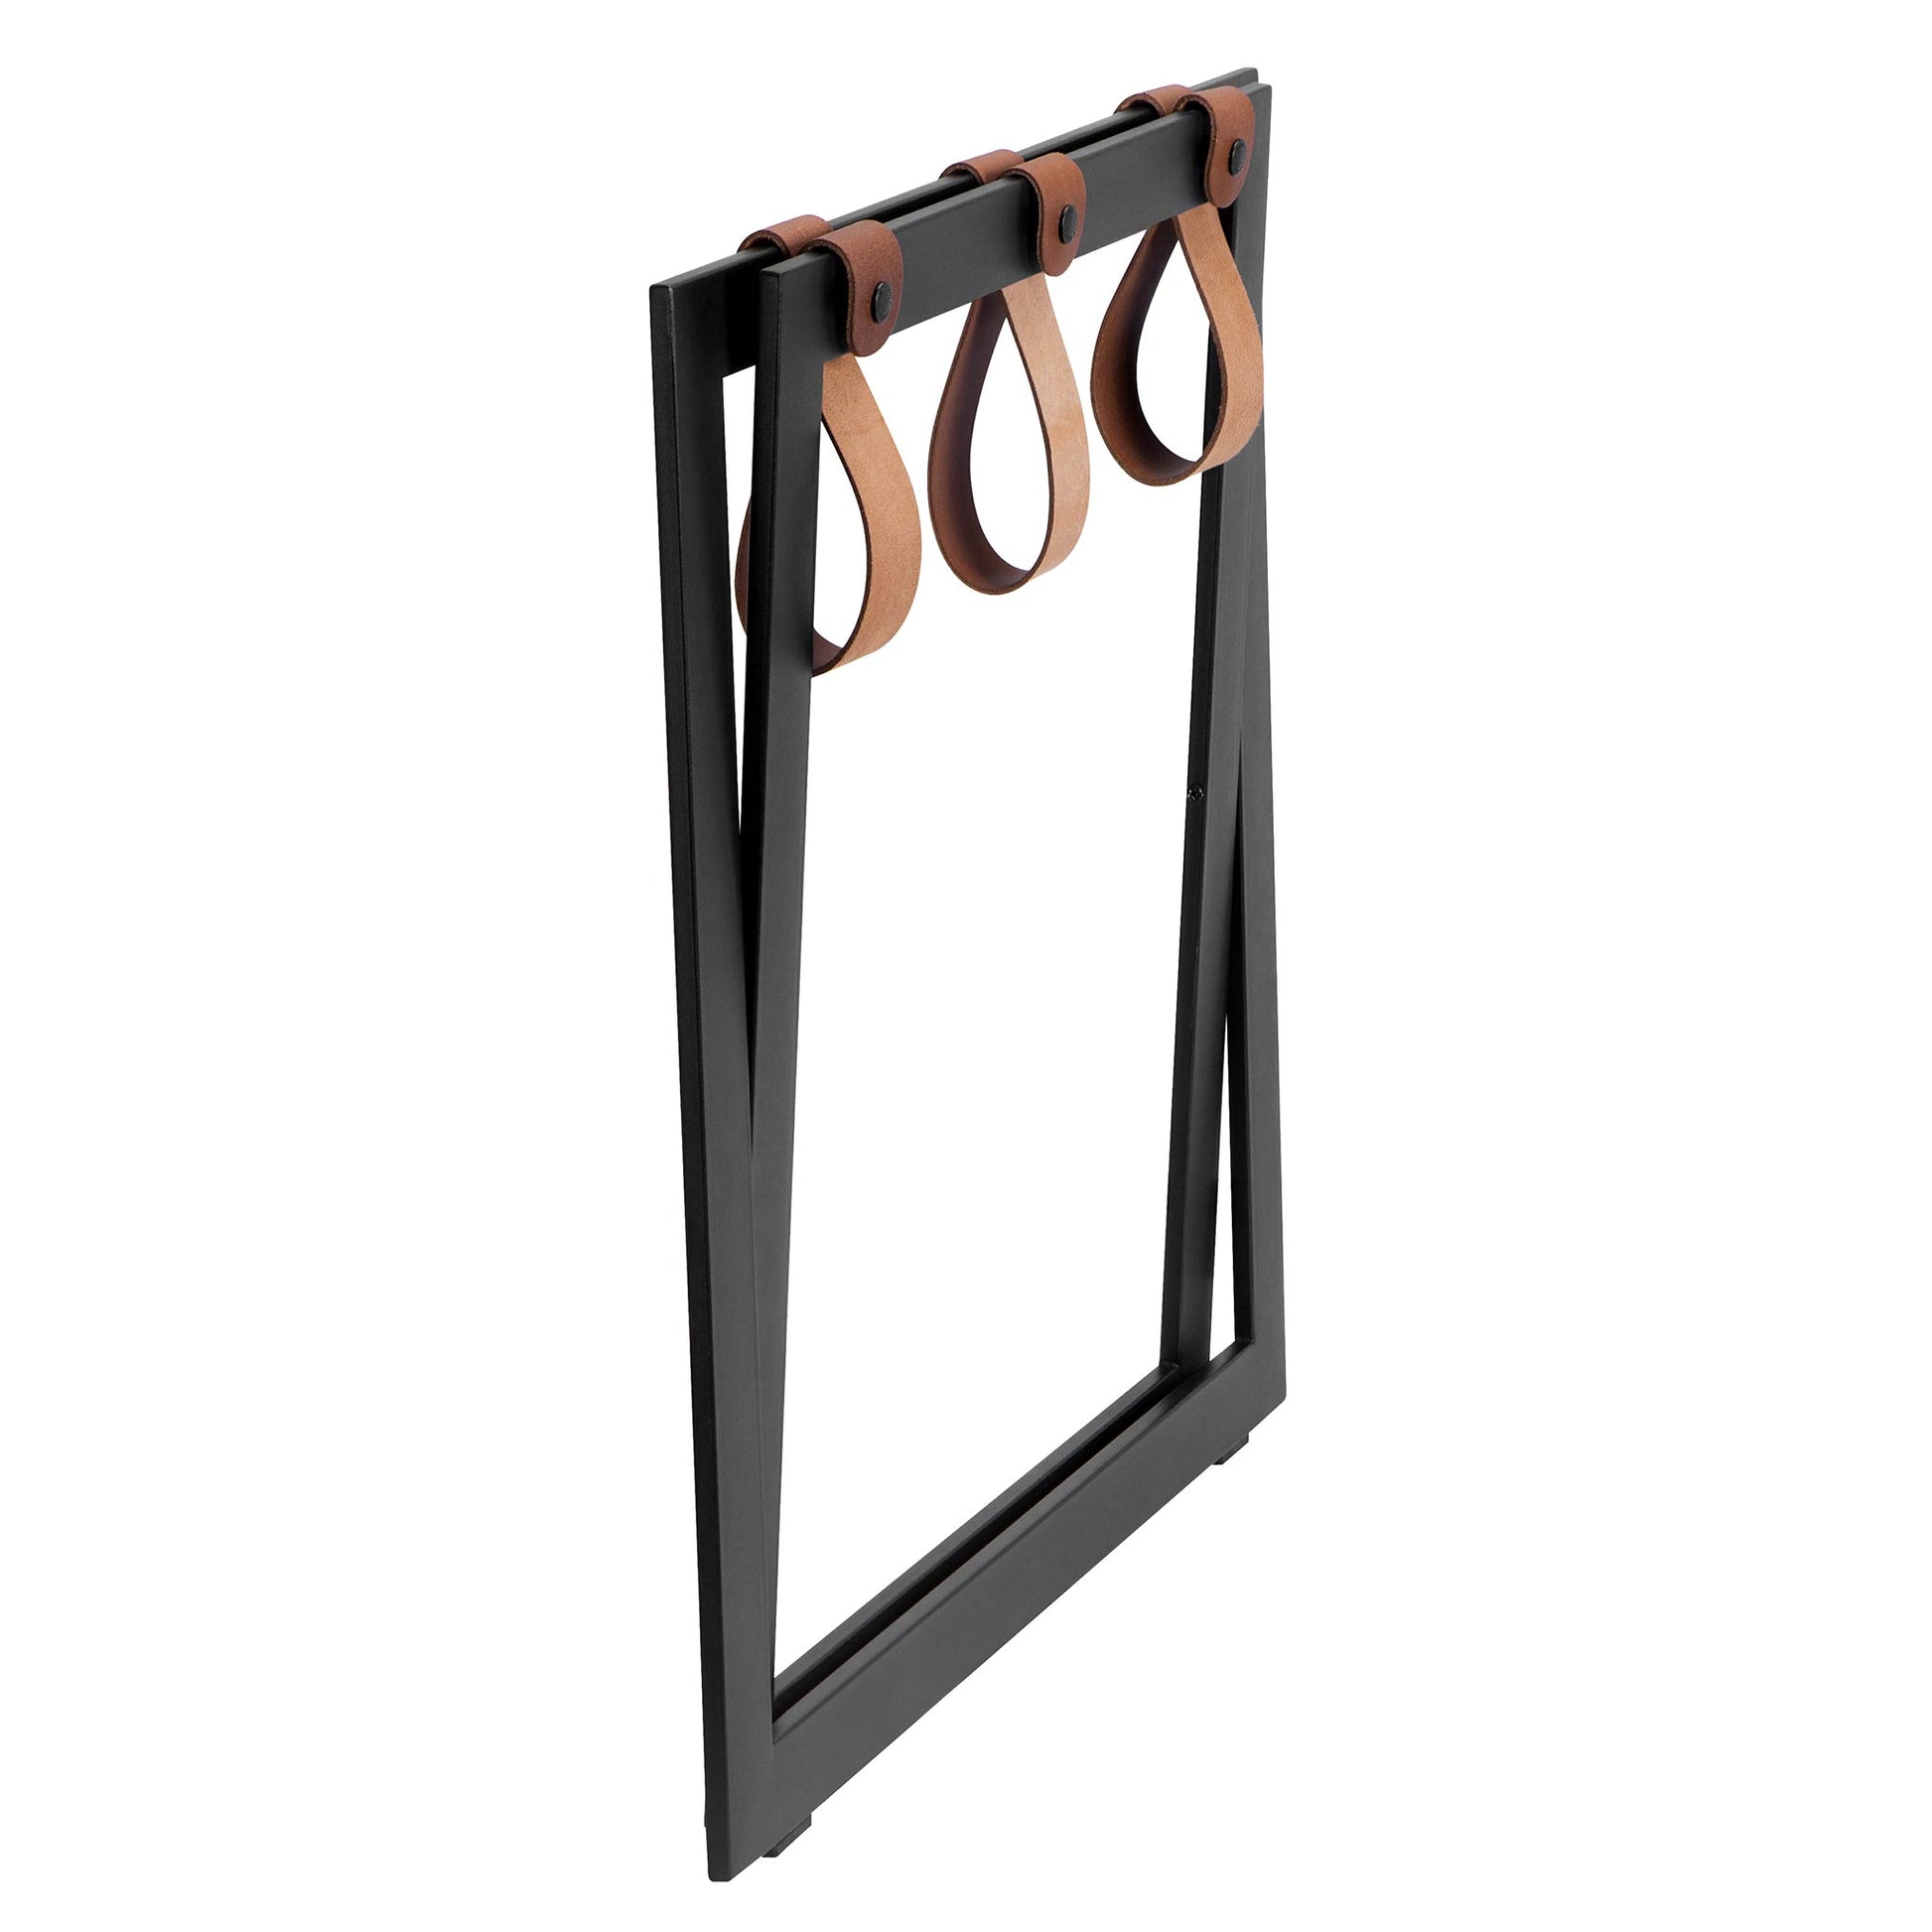 Roootz black steel compact hotel luggage rack folded with cognac brown leather straps